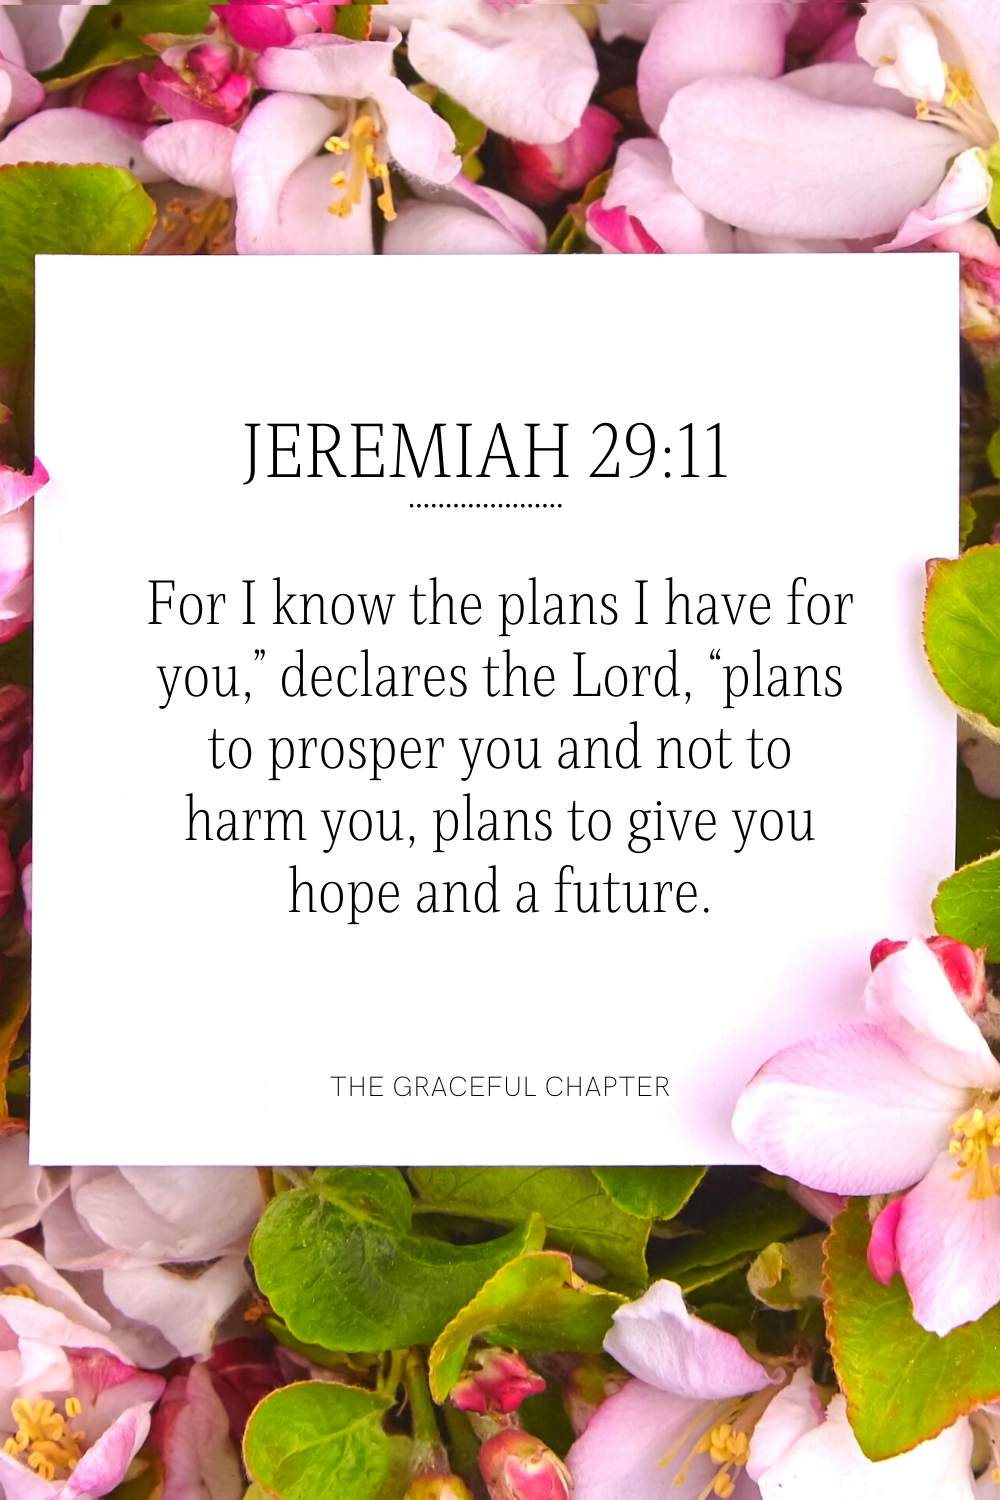 For I know the plans I have for you,” declares the Lord, “plans to prosper you and not to harm you, plans to give you hope and a future. Jeremiah 29:11